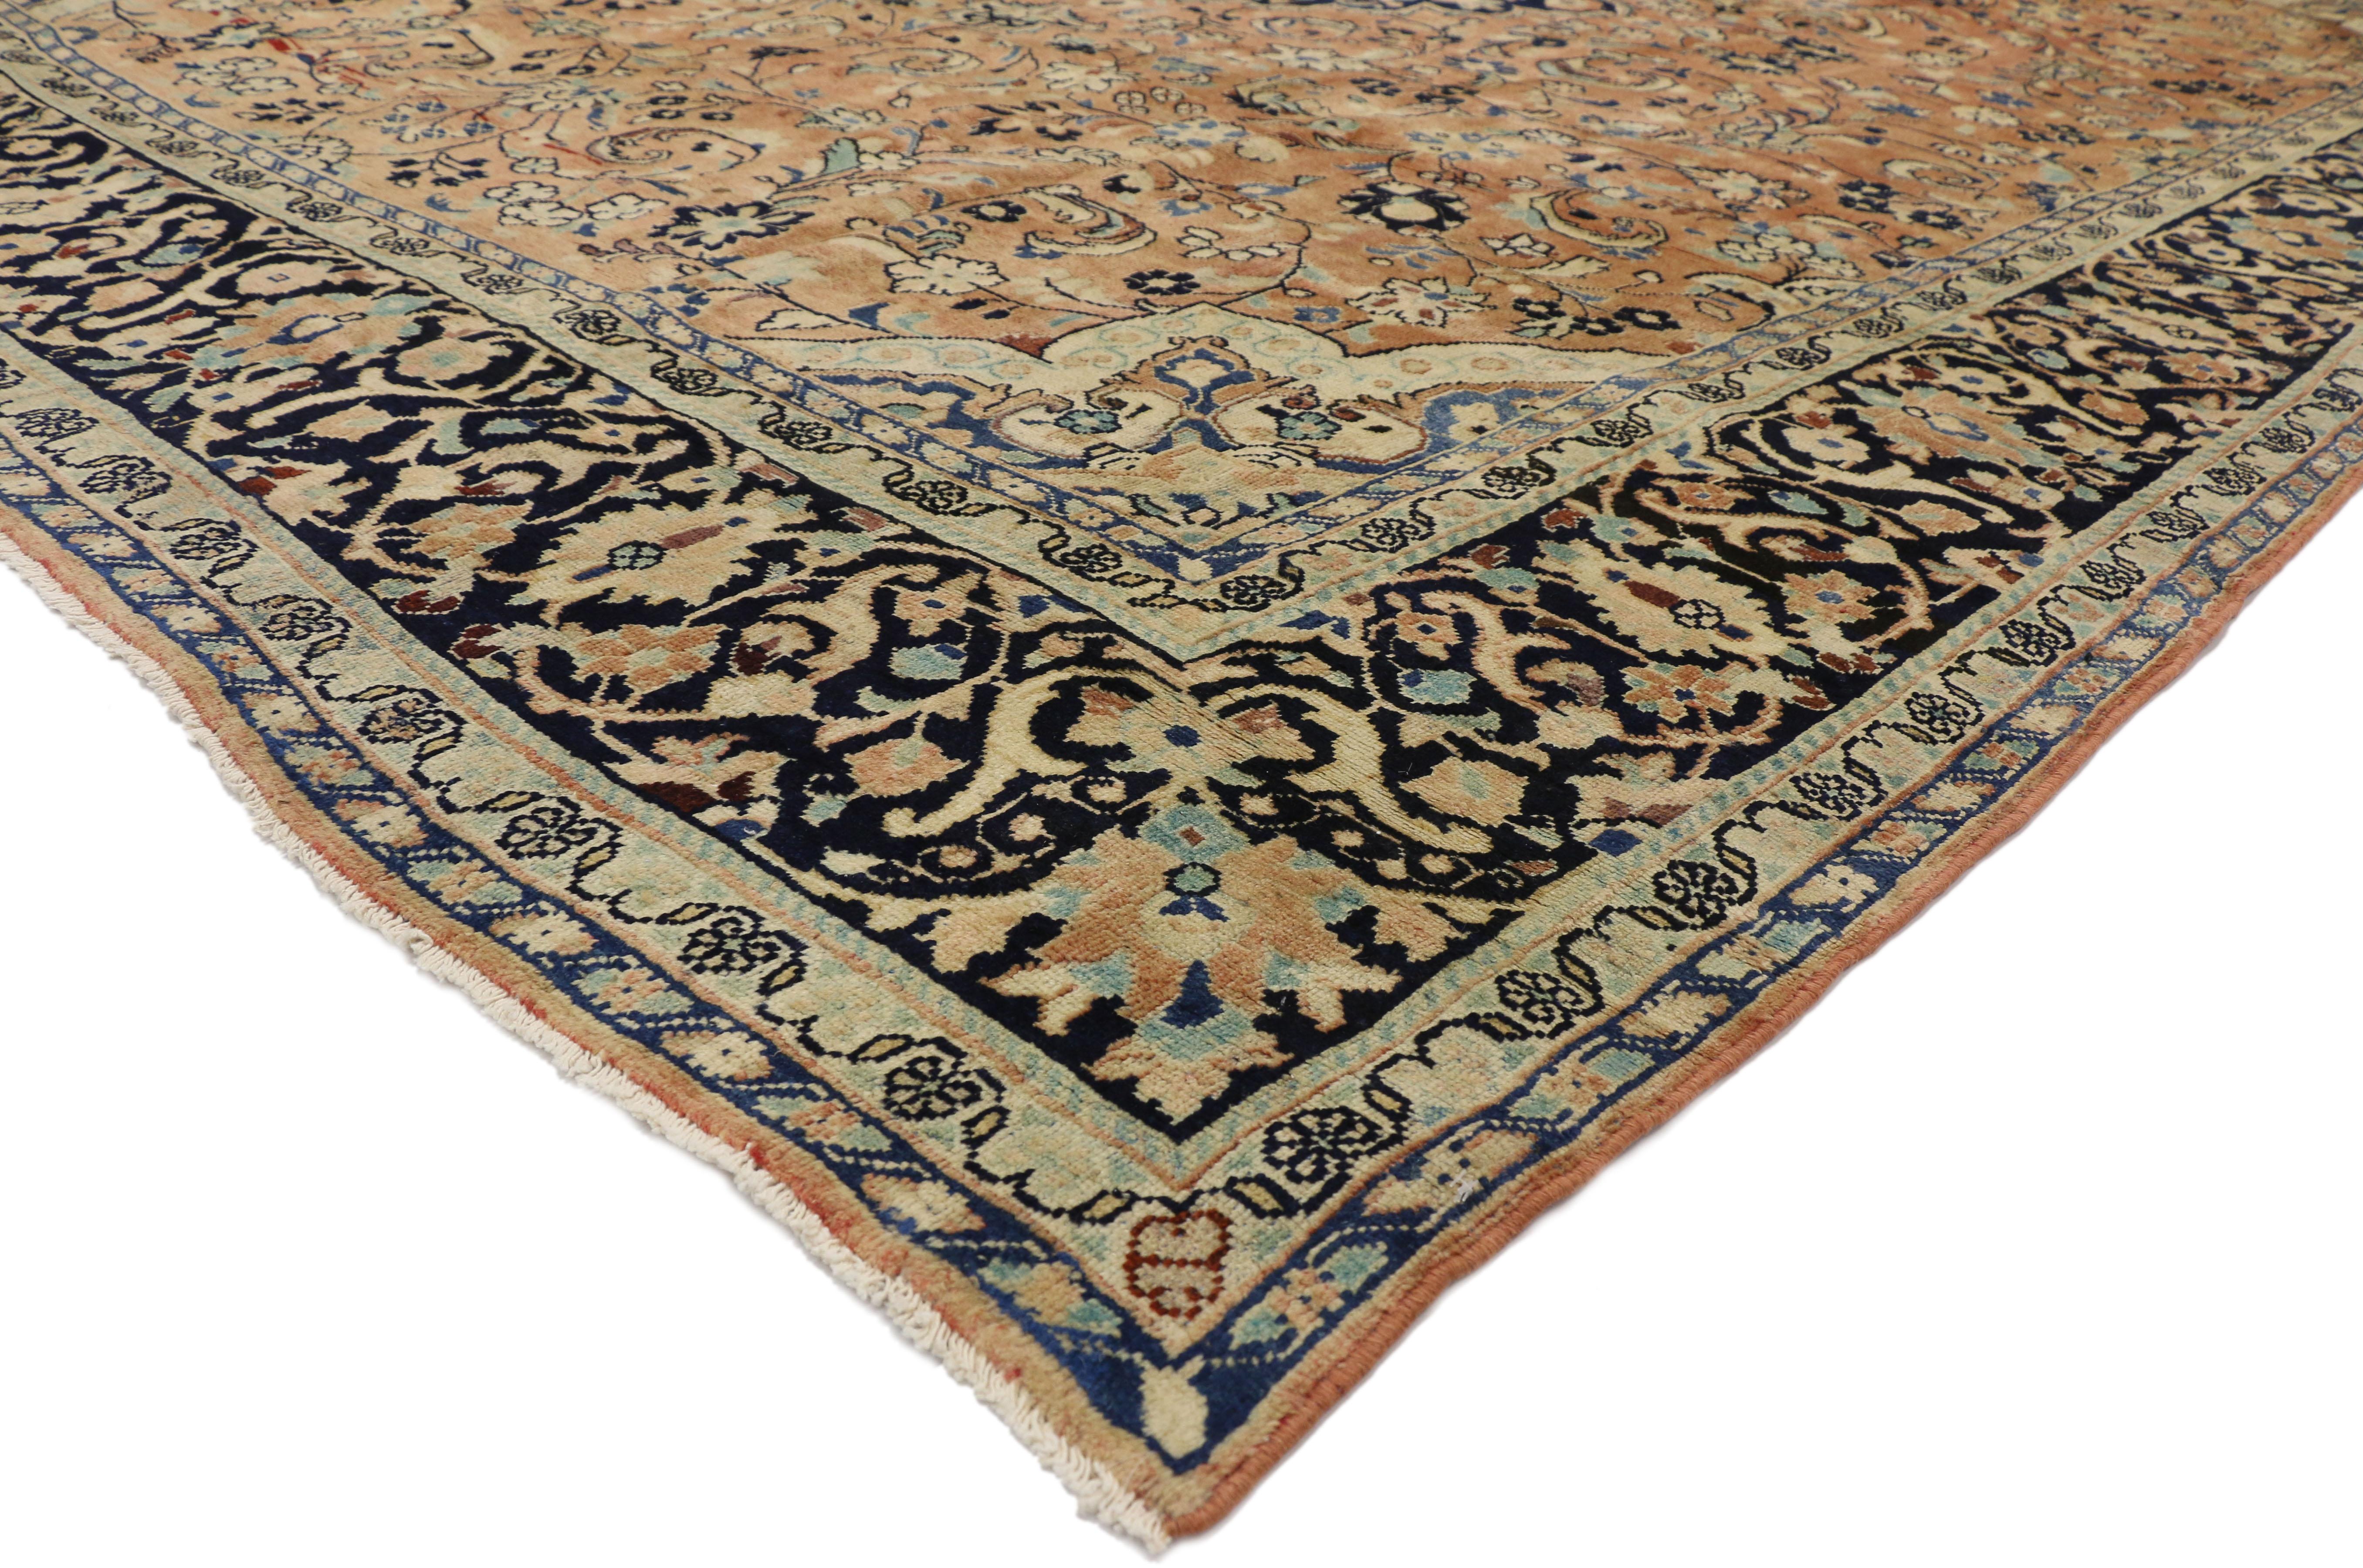 76378 Vintage Persian Mahal Rug with Arabesque Art Nouveau and Russian Home Style 10'08 X 14'00. This hand knotted wool vintage Persian Mahal rug features a cusped centre medallion surrounded by an all-over floral pattern composed of blooming